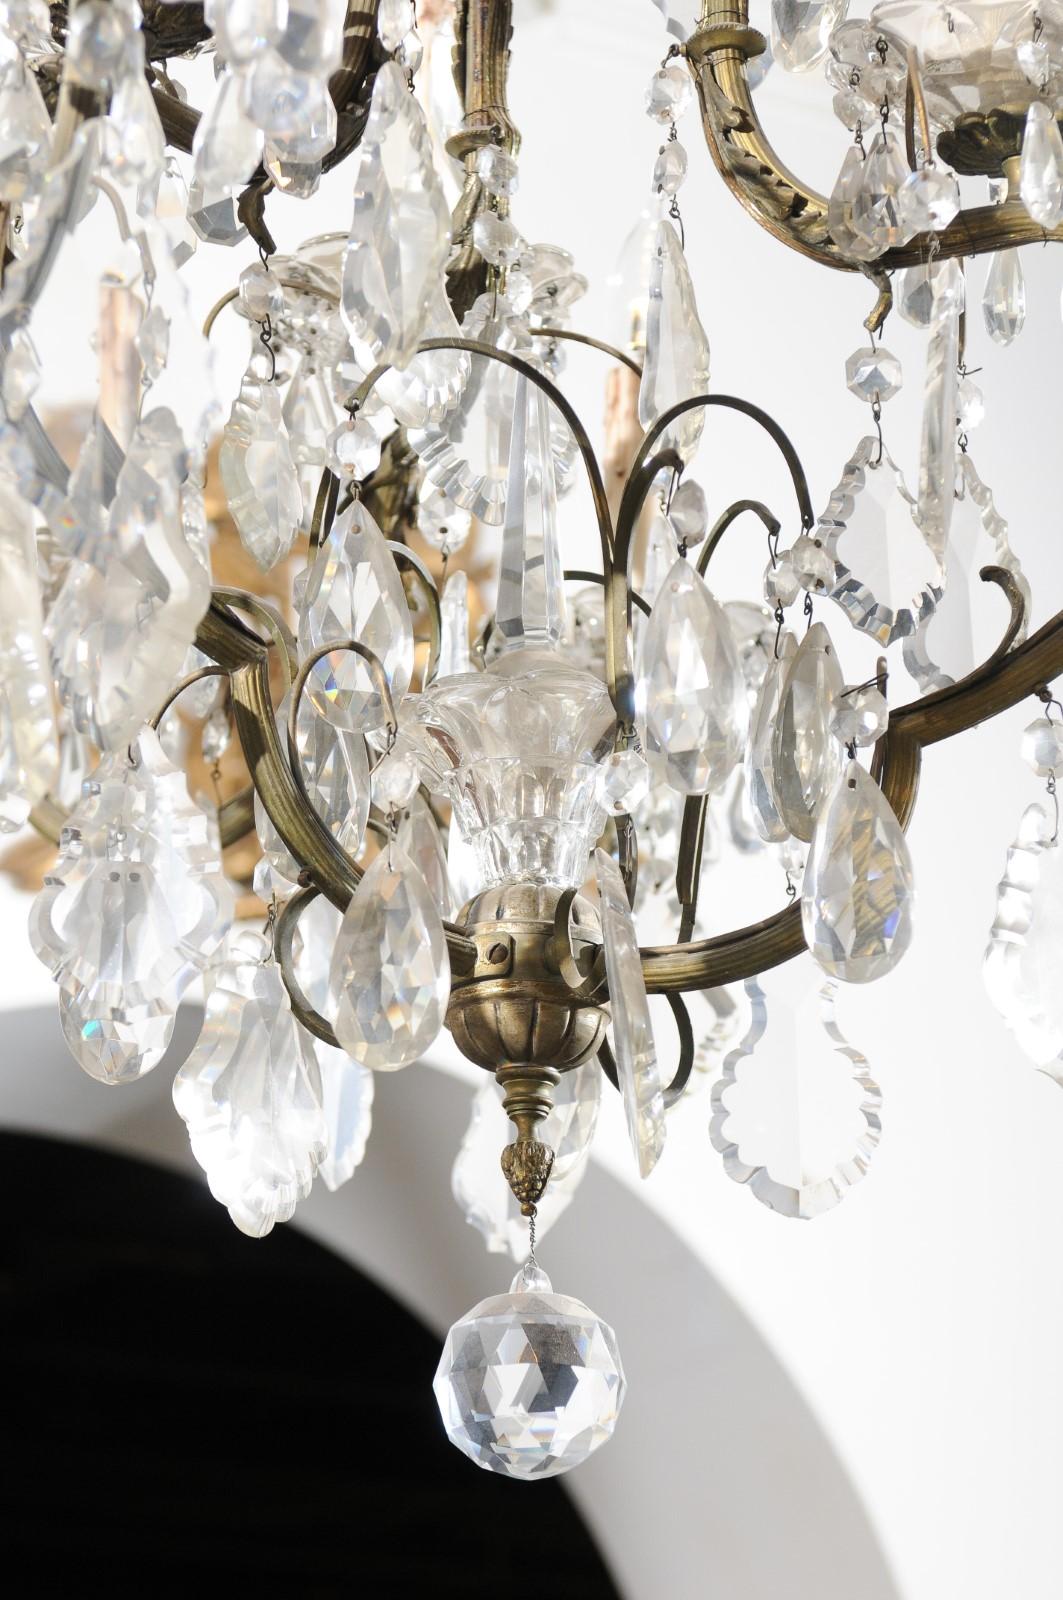 French Eight-Light Crystal Chandelier with Iron Armature from the 19th Century For Sale 5